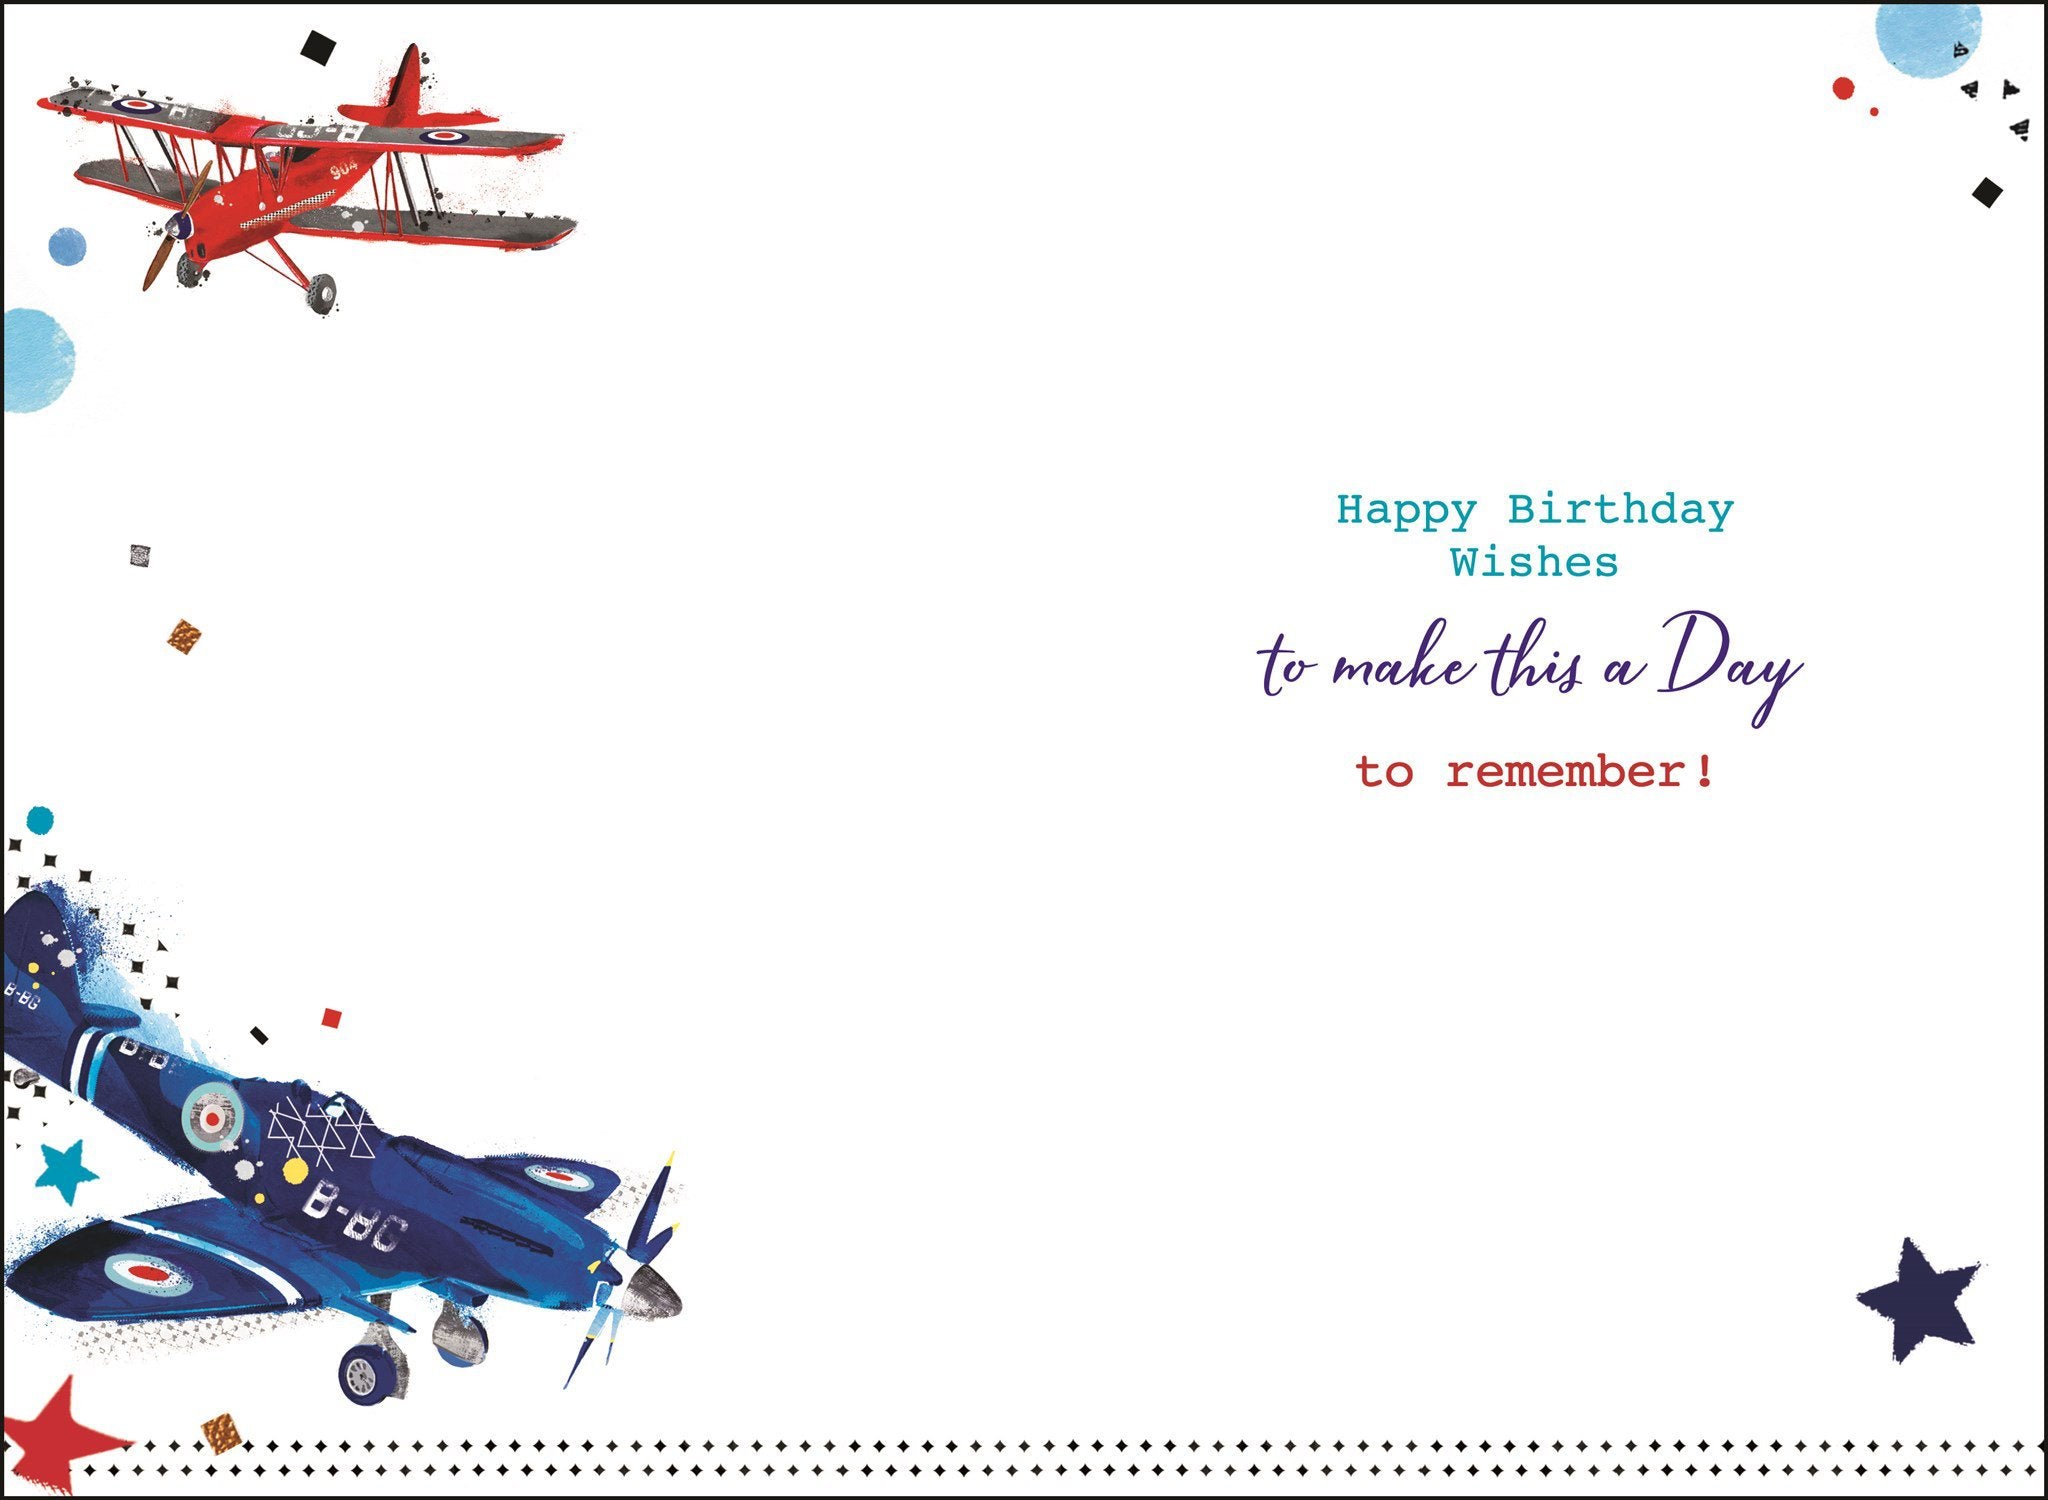 Inside of Open Male Birthday Planes Greetings Card